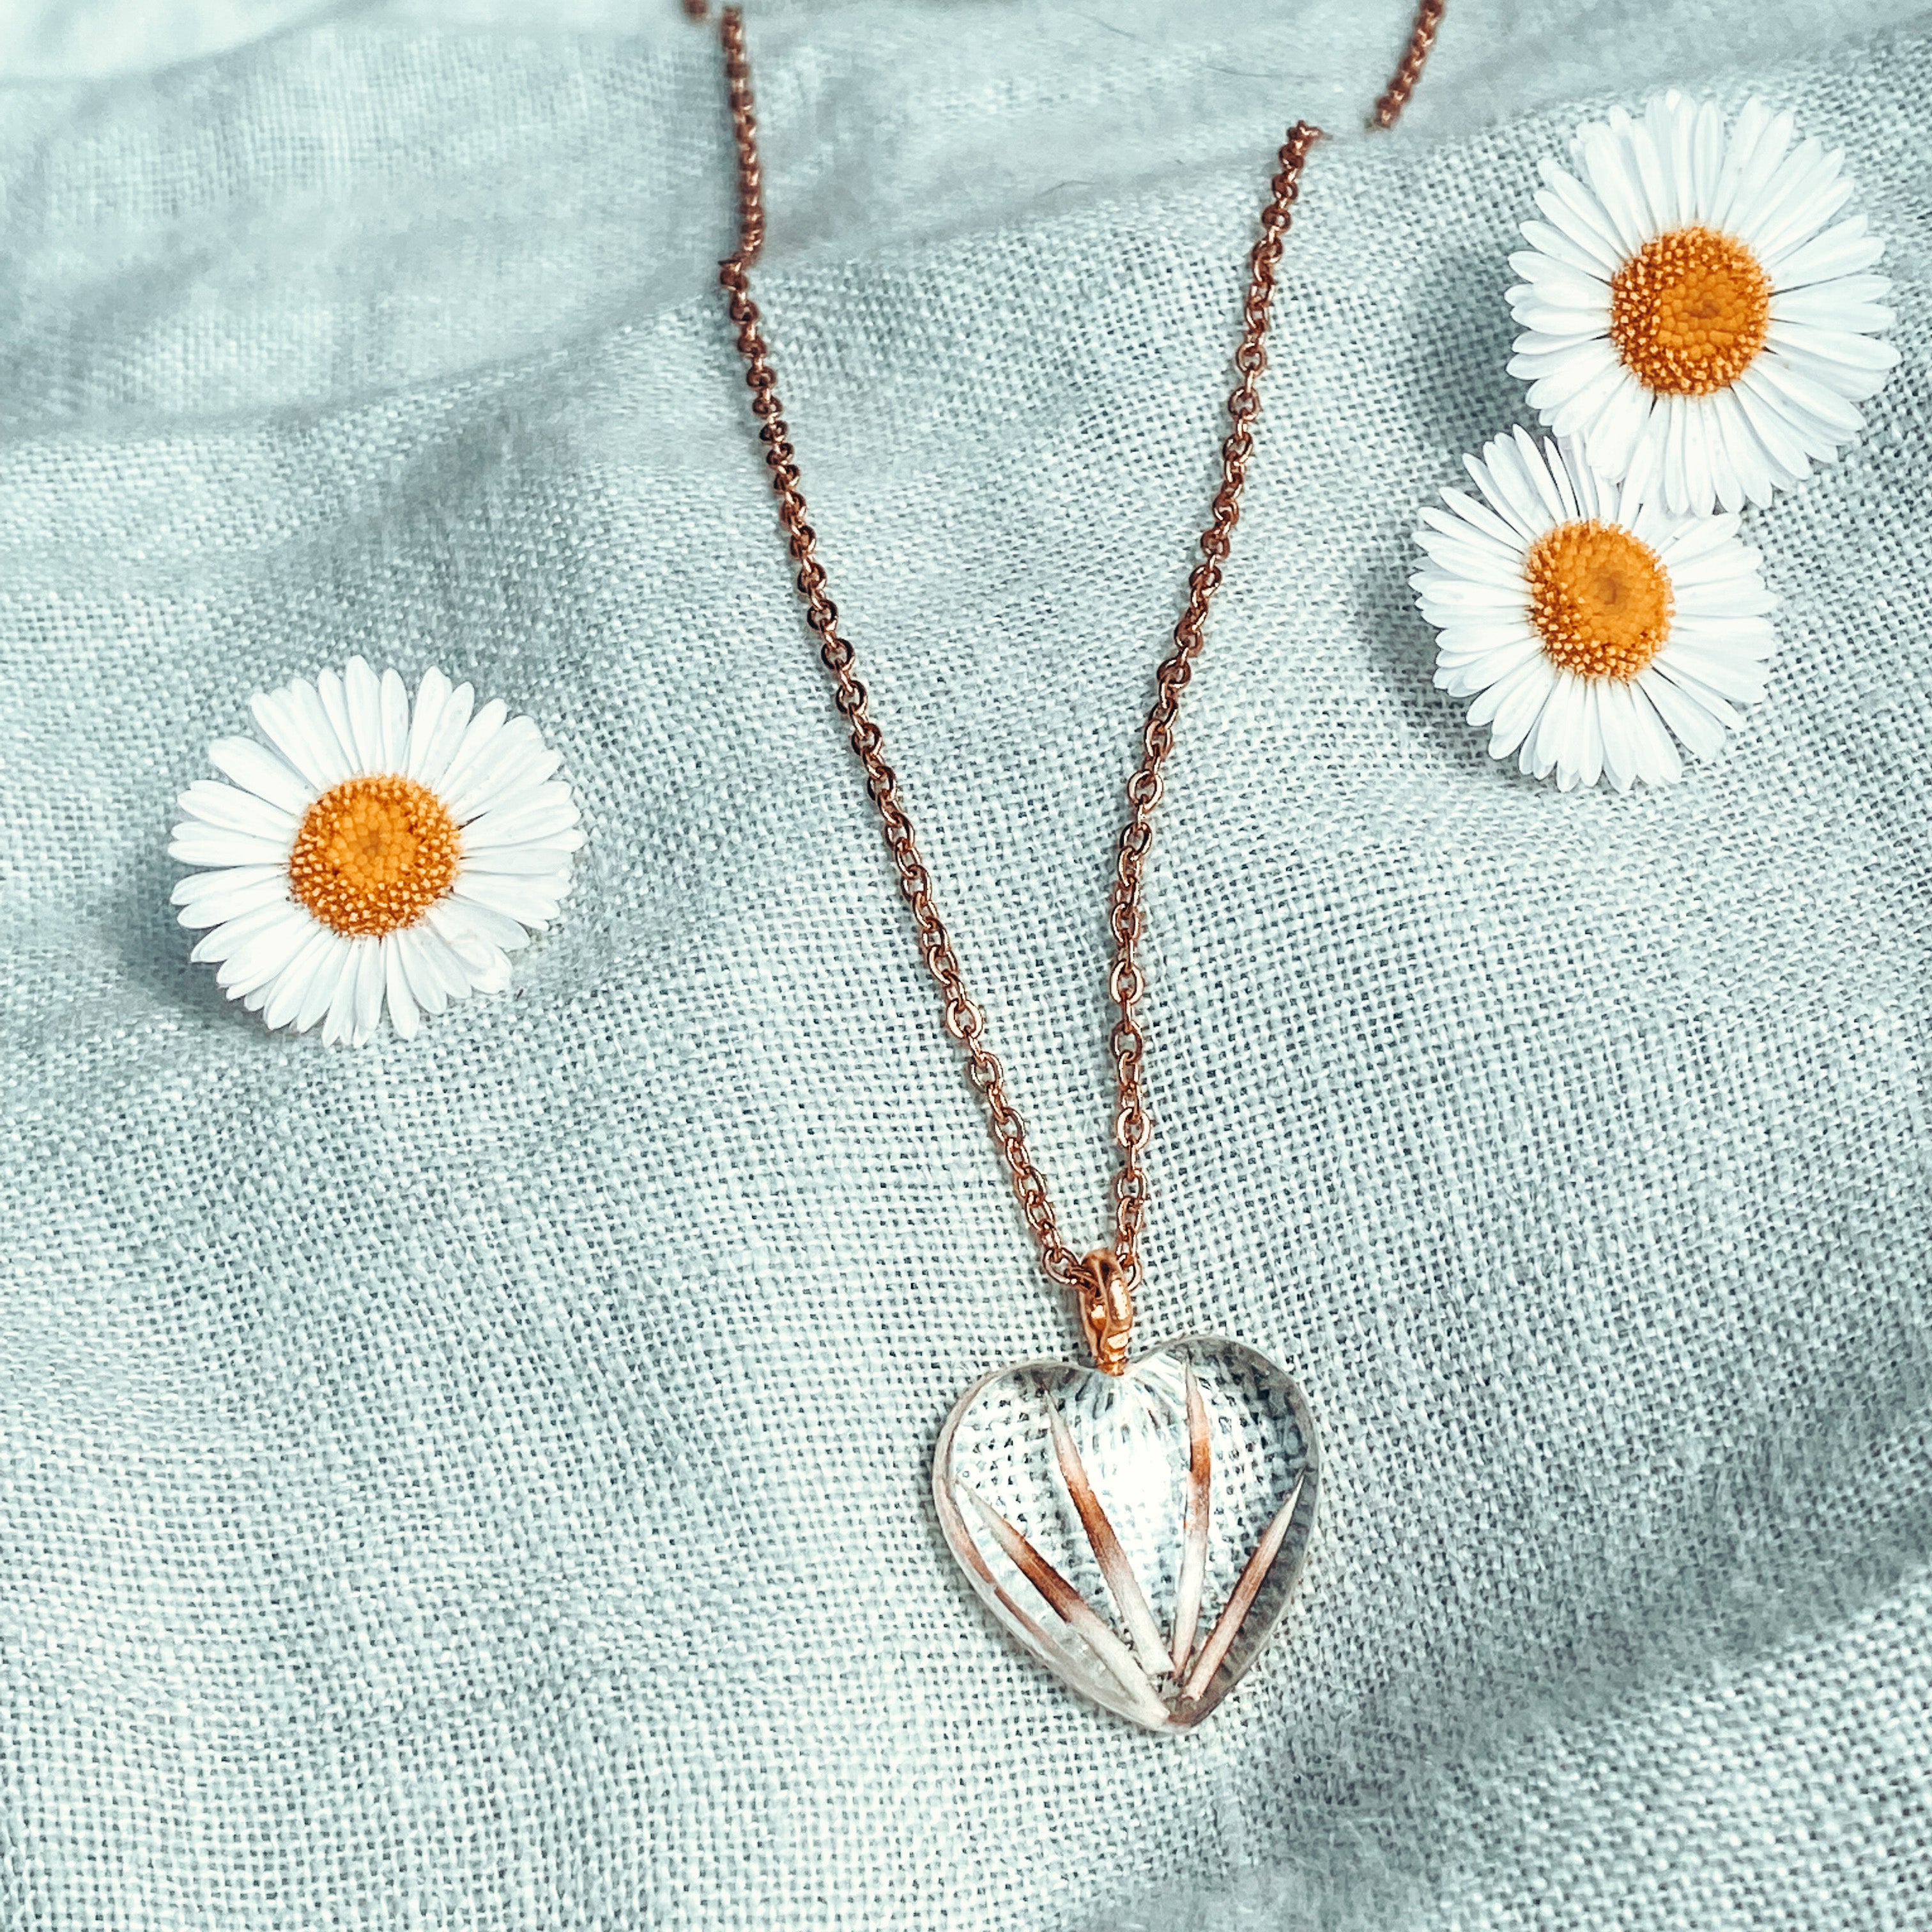 Tiny Personalized Heart Necklace